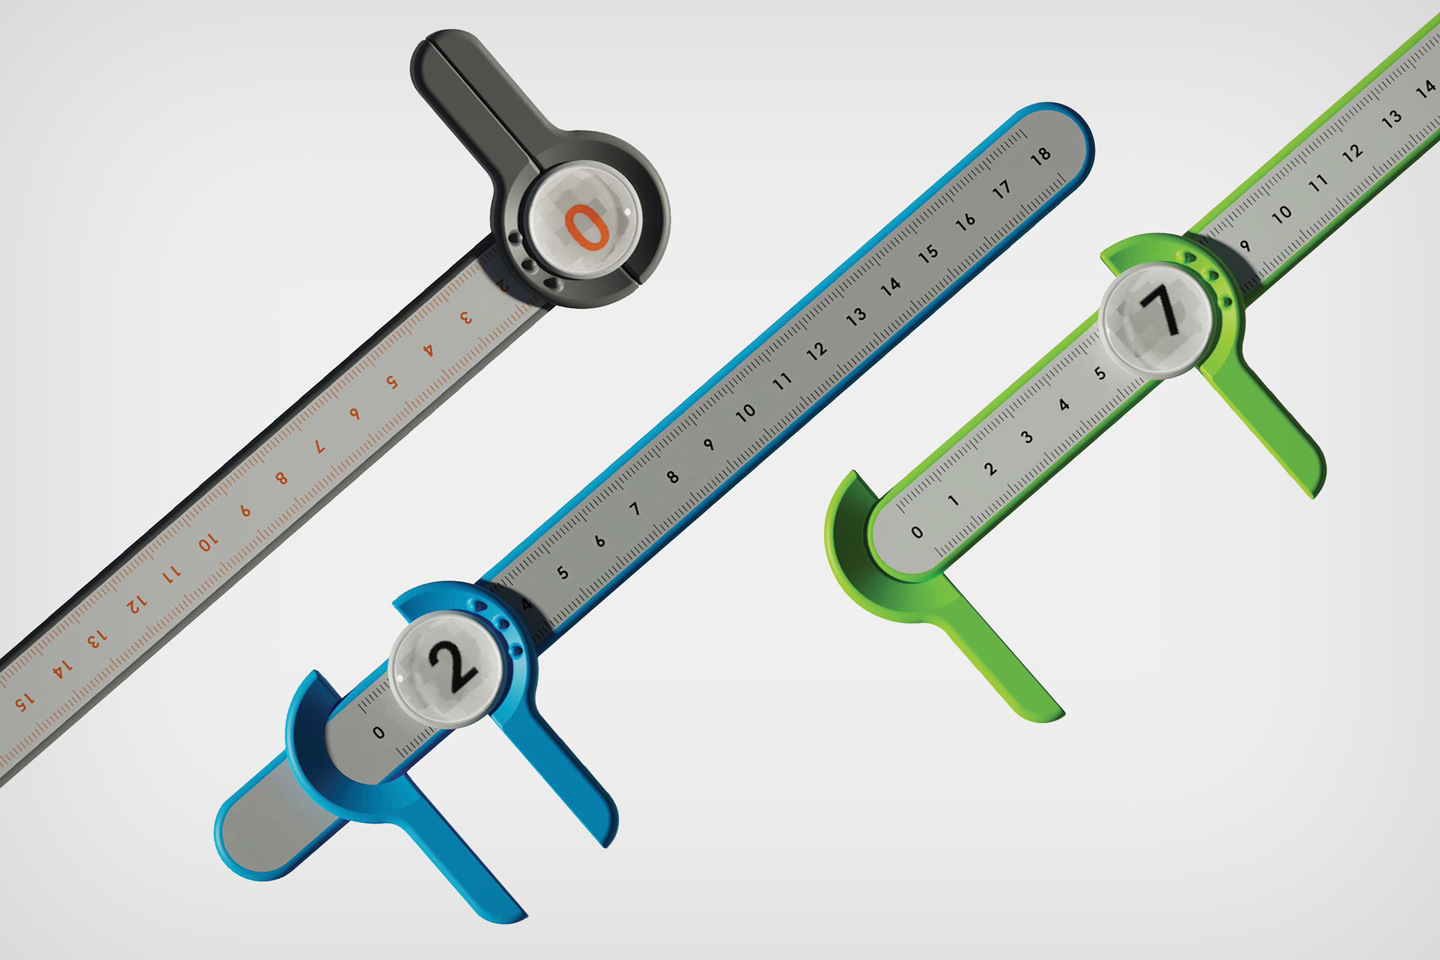 #Innovative measuring scale comes with a magnifying lens to make the numbers more visible